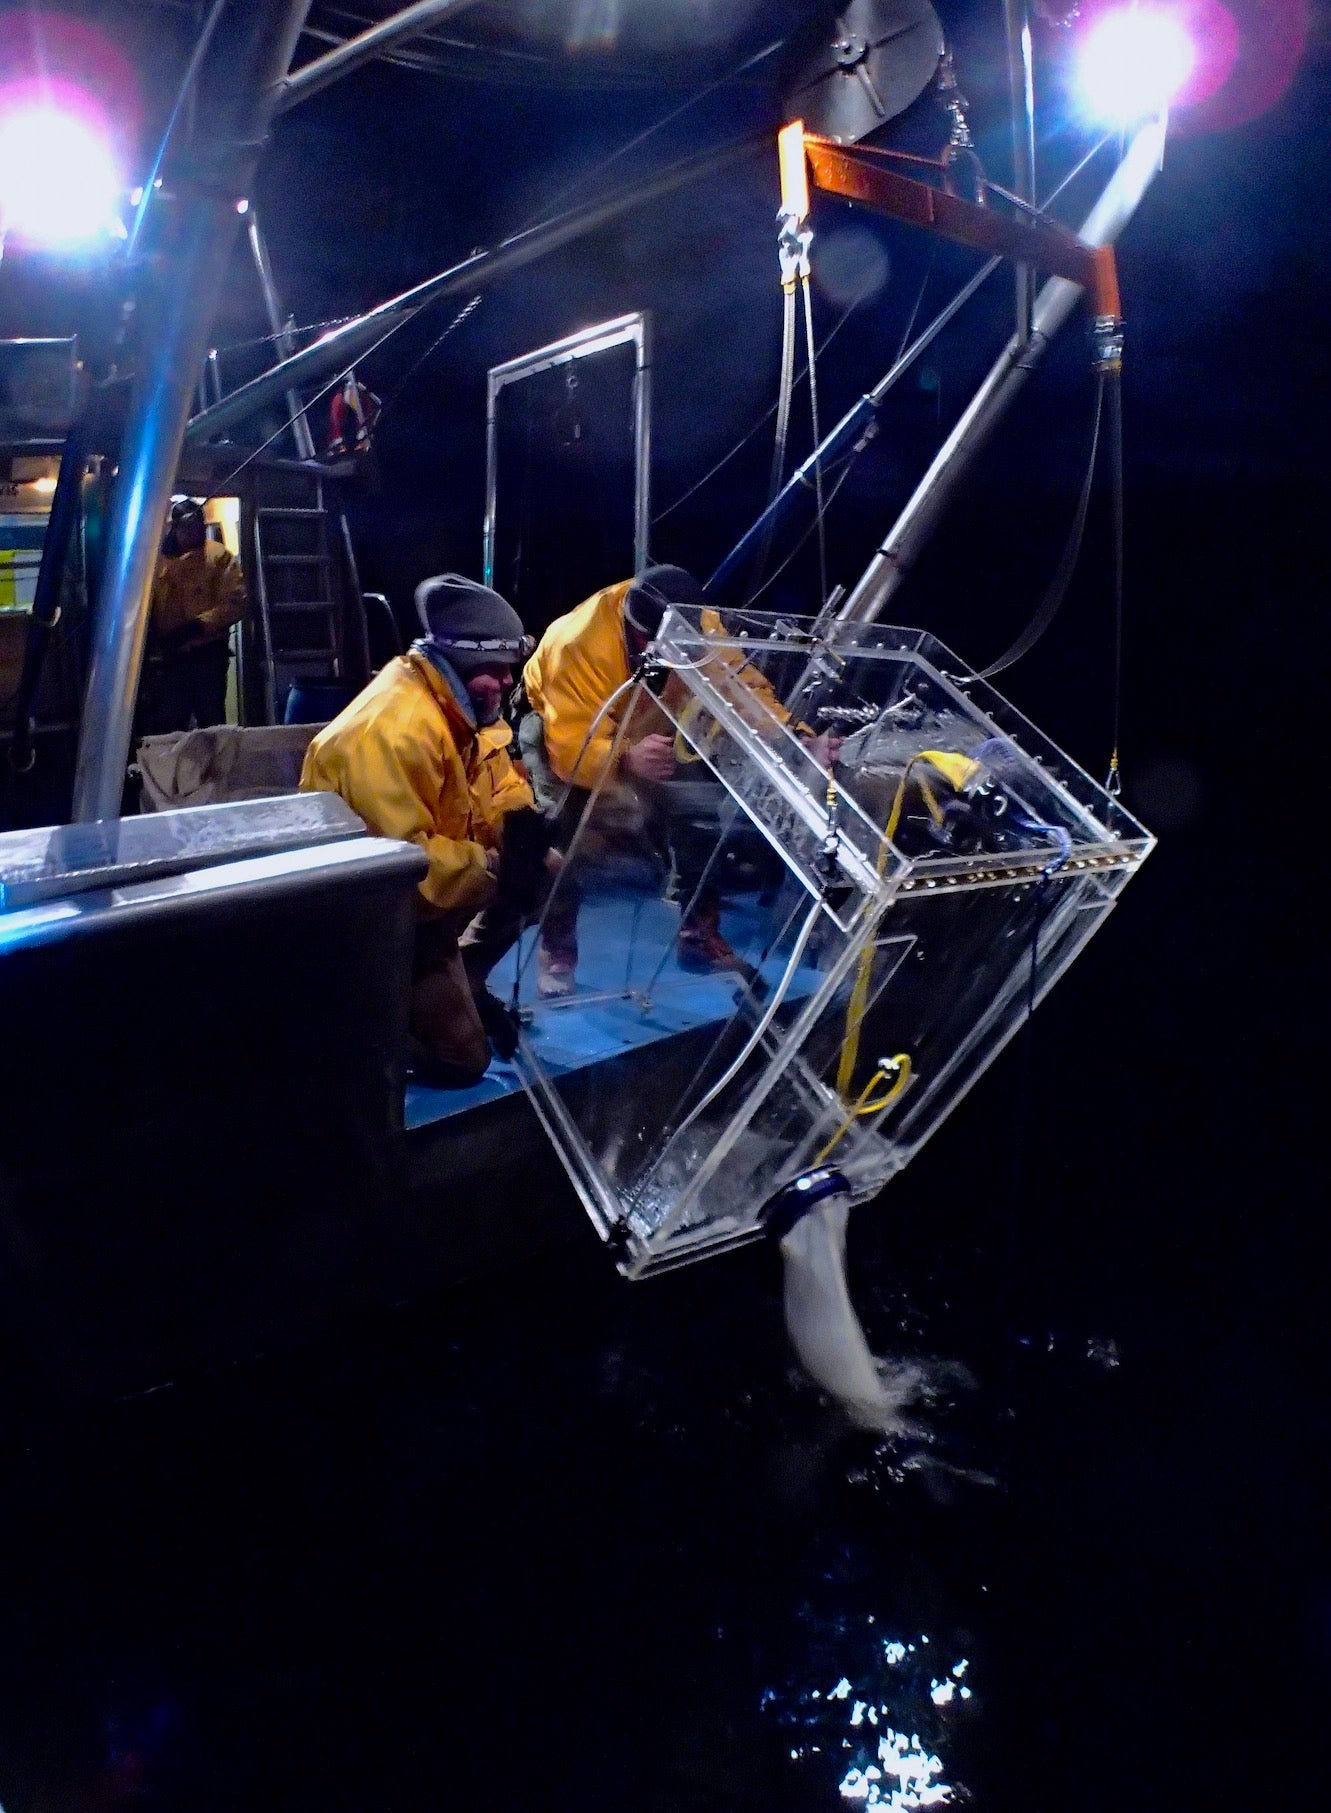 Two scientists bring in cage while trawling for mysis shrimp at night at Lake Tahoe